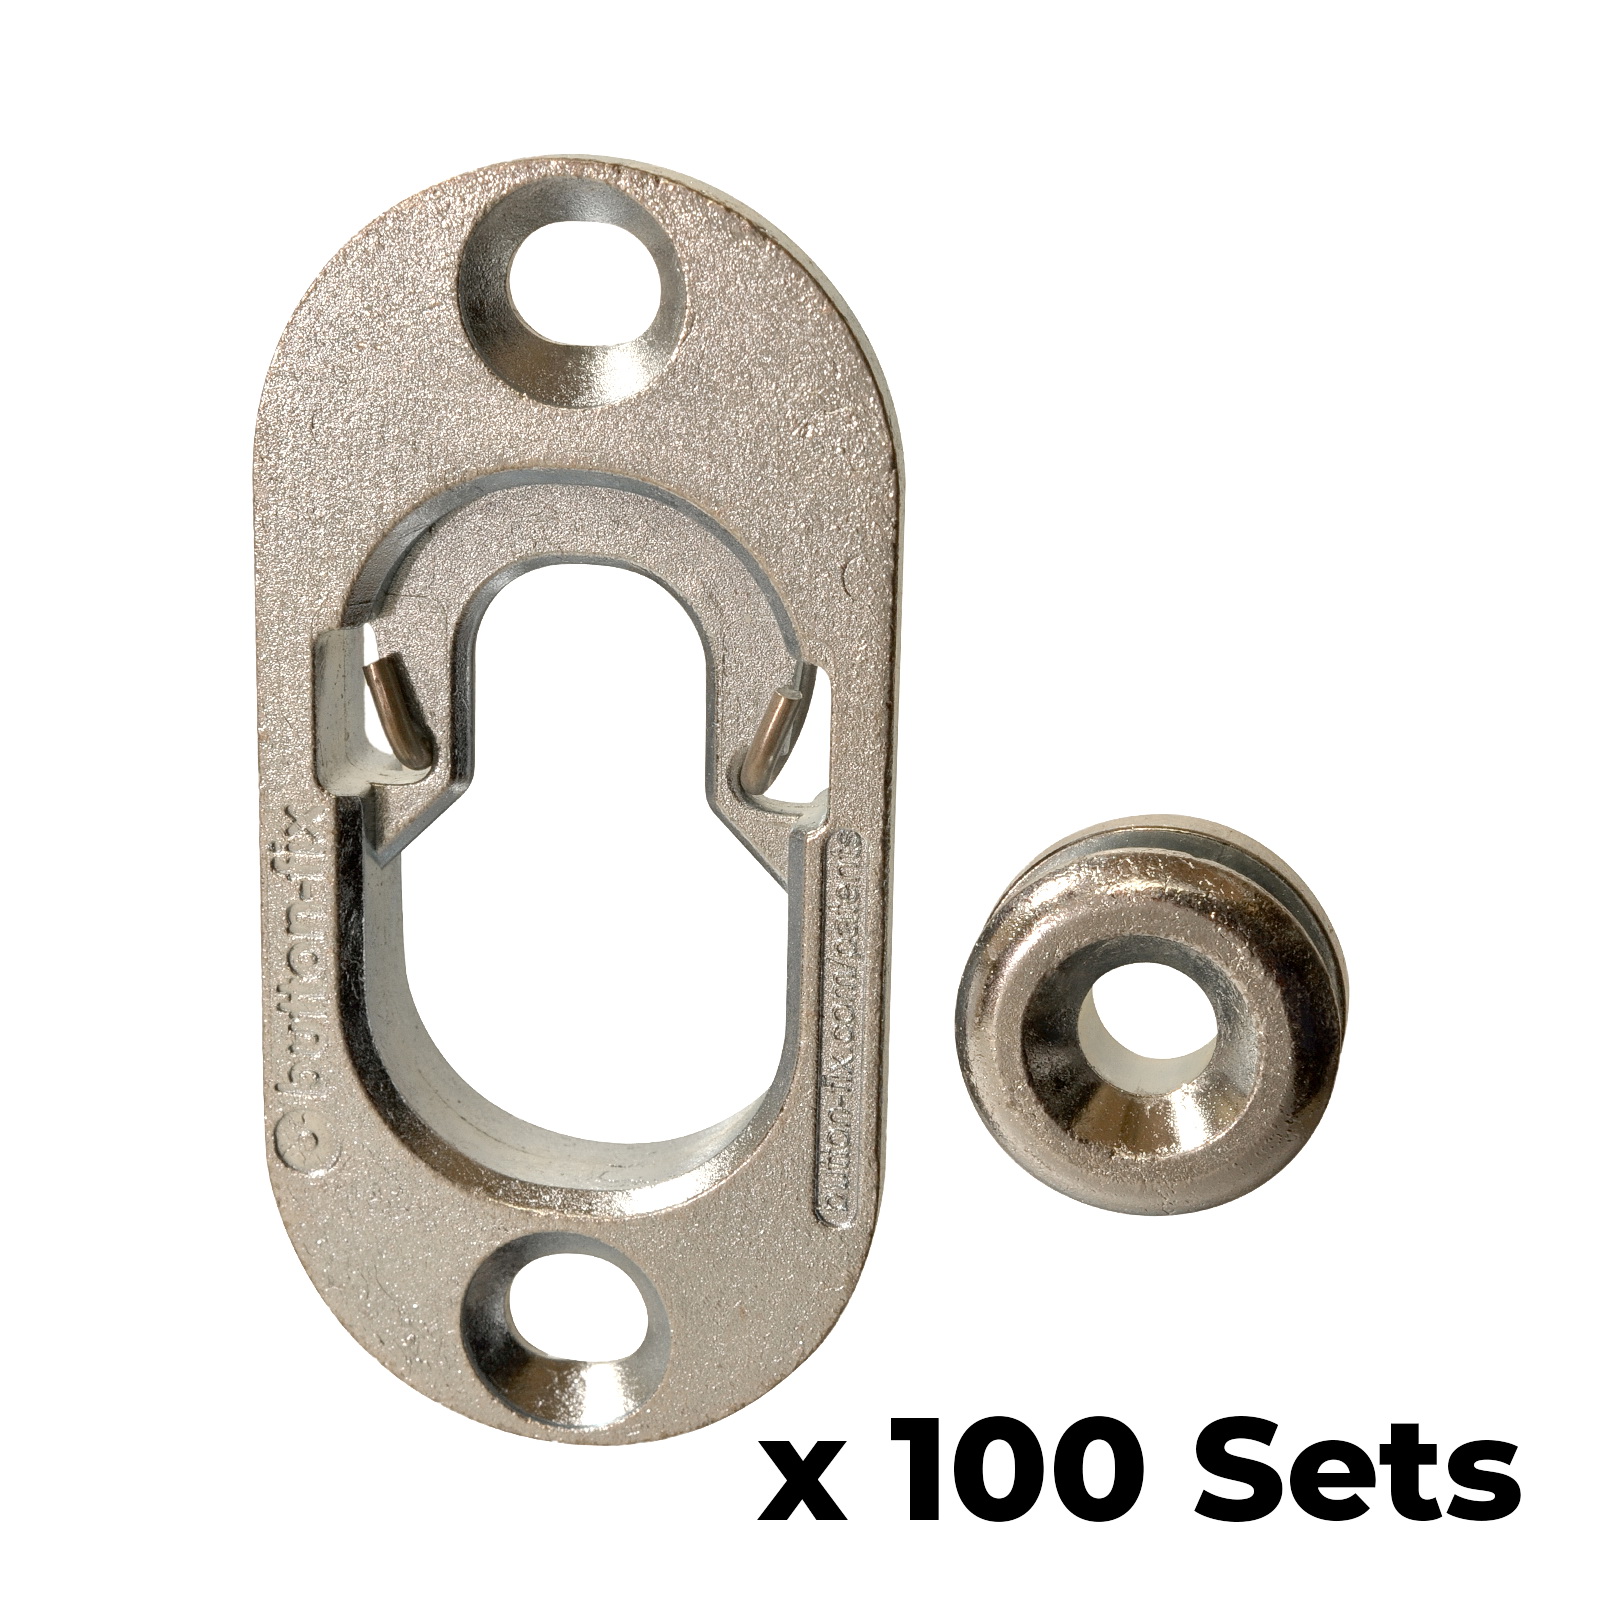 Type 2 Button Fix Type 1 Bracket Bonded Flush Panel Connecting Fixings 